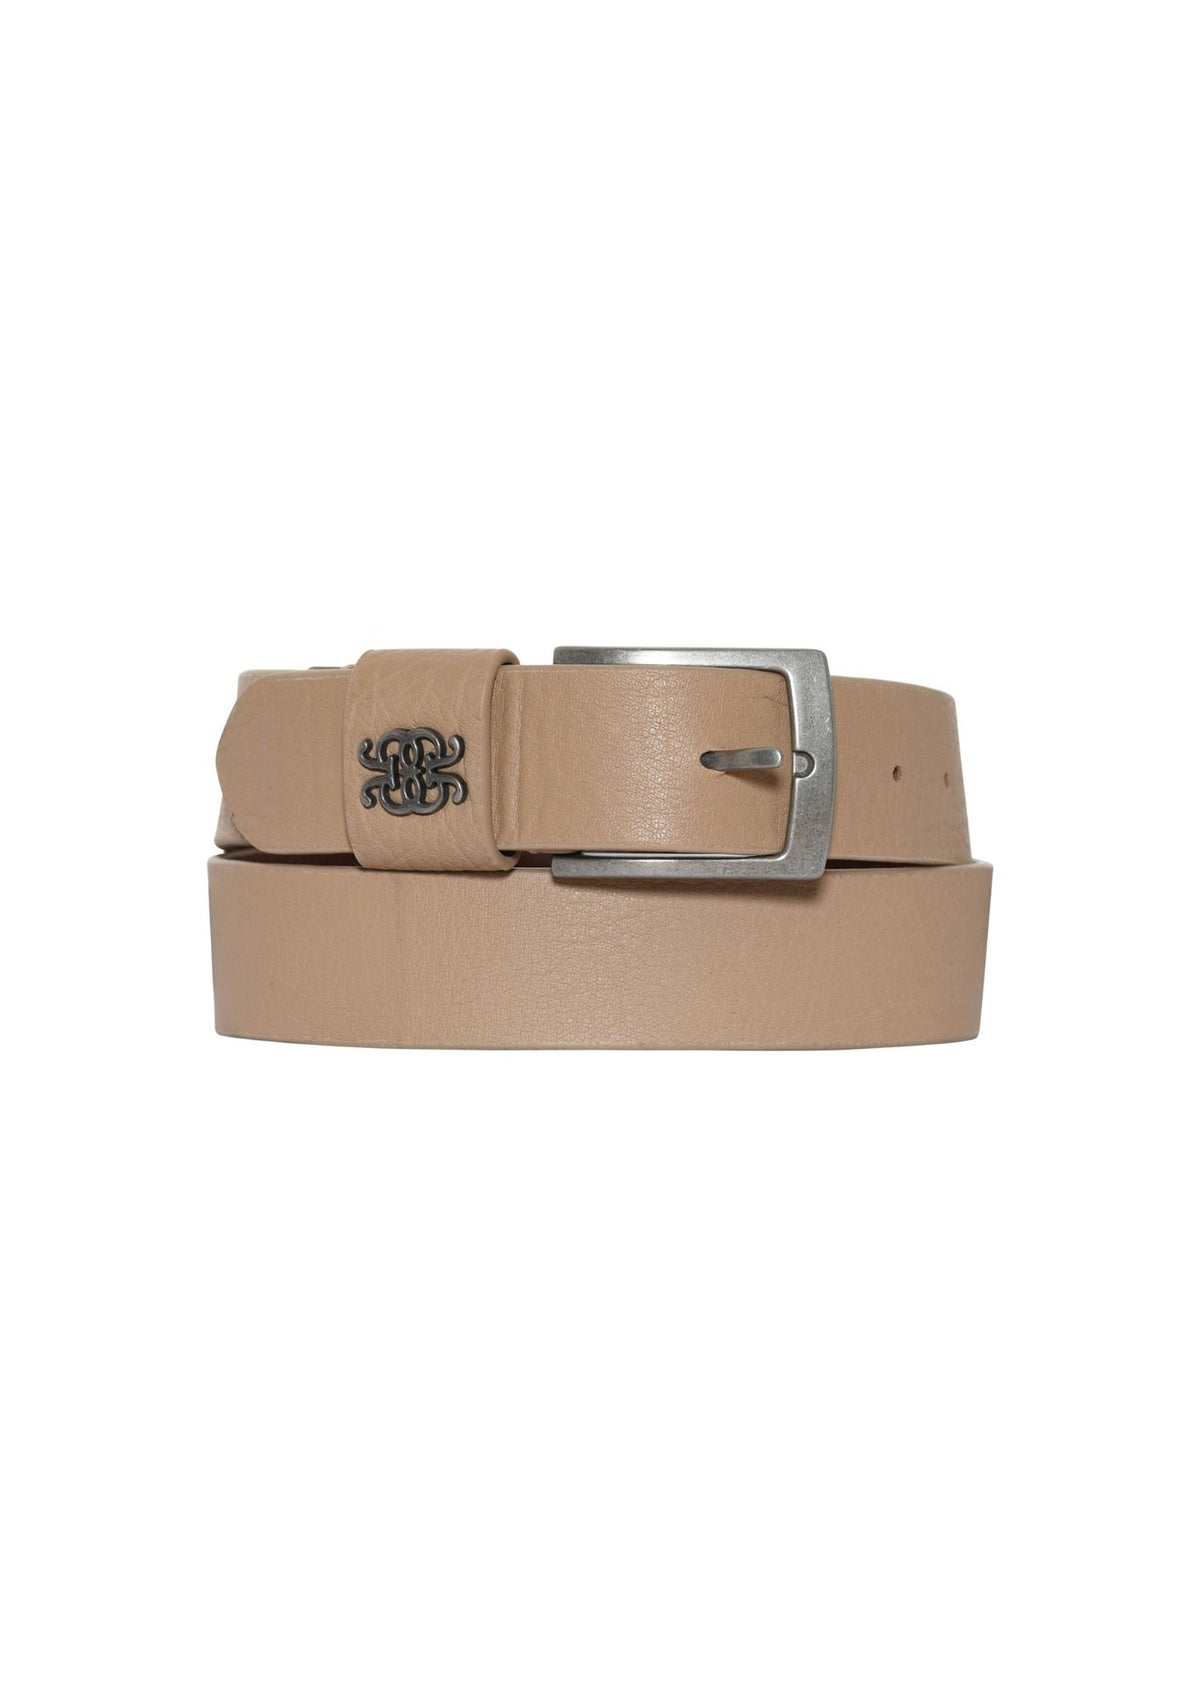 Crystal Leather Belt Taupe with Square nickel buckle and loop detail.